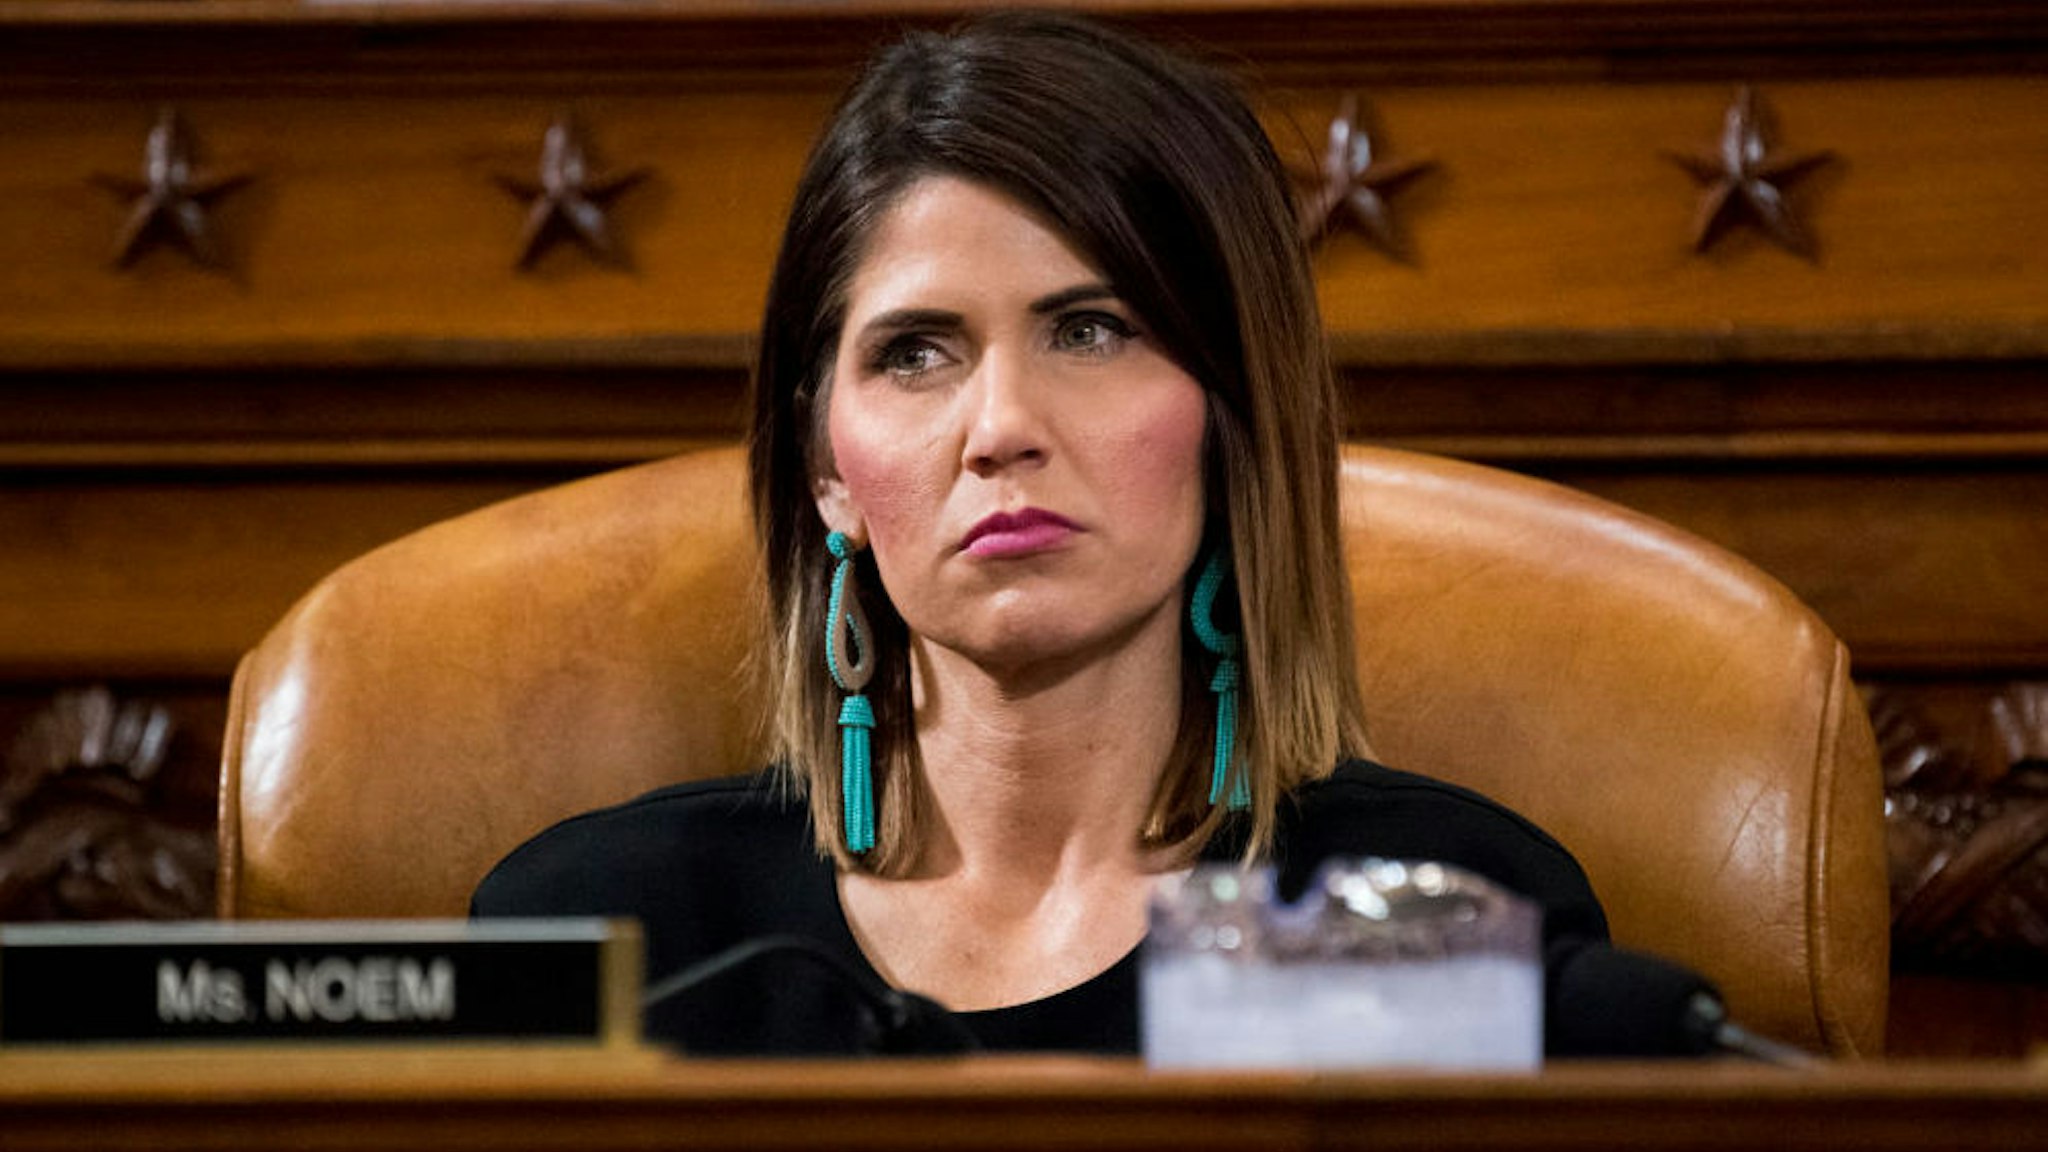 Rep. Kristi Noem, R-S. Dak., listens during the House Ways and Means Committee hearing on President Trumps budget proposals for fiscal year 2018 on Wednesday, May 24, 2017.